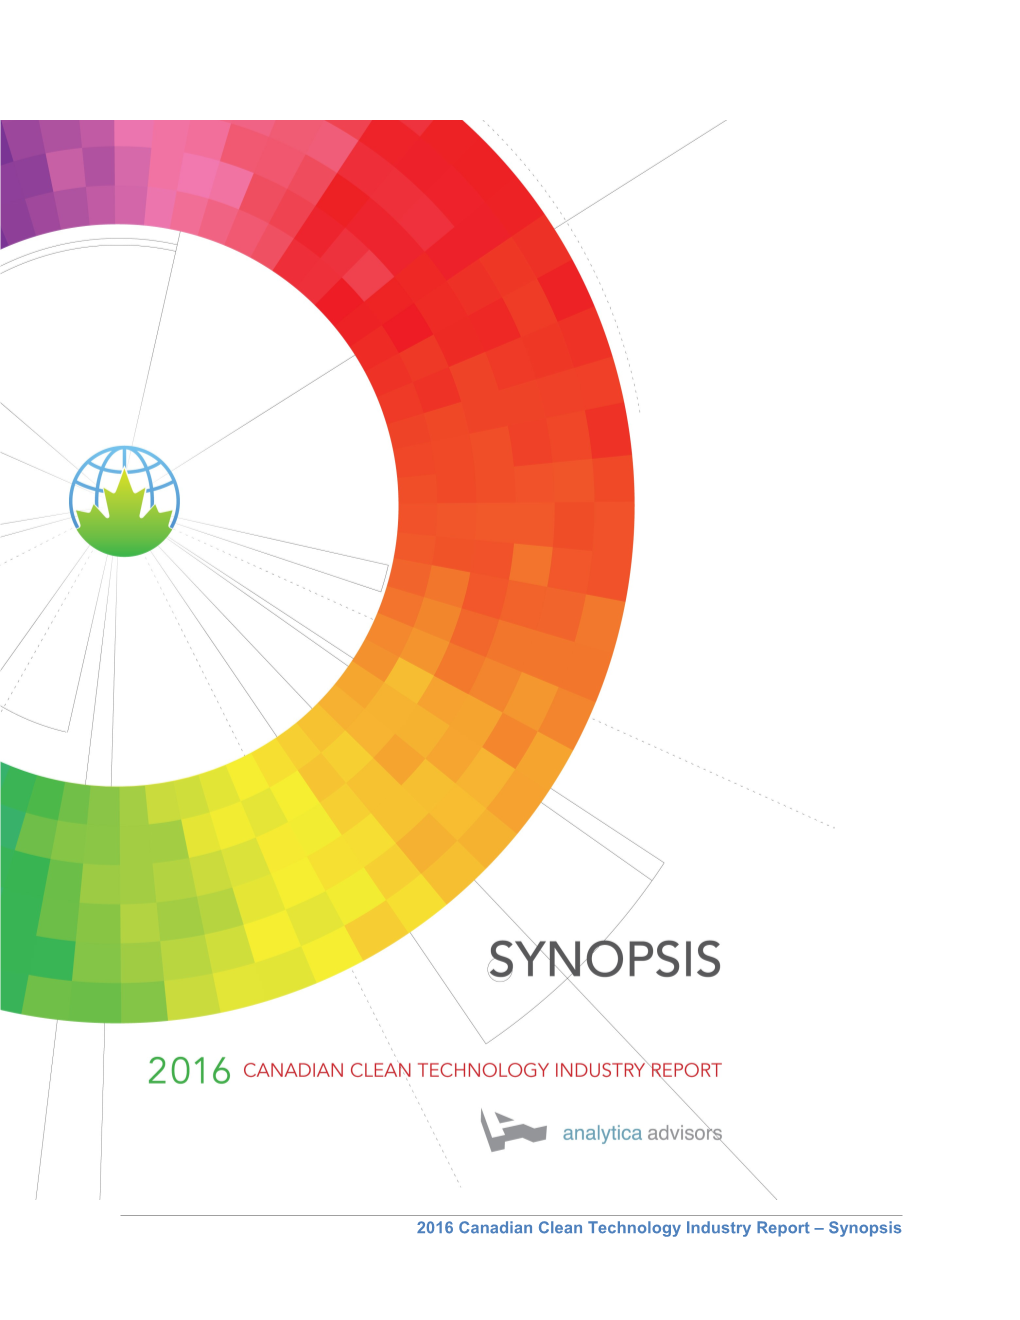 2016 Canadian Clean Technology Industry Report Synopsis